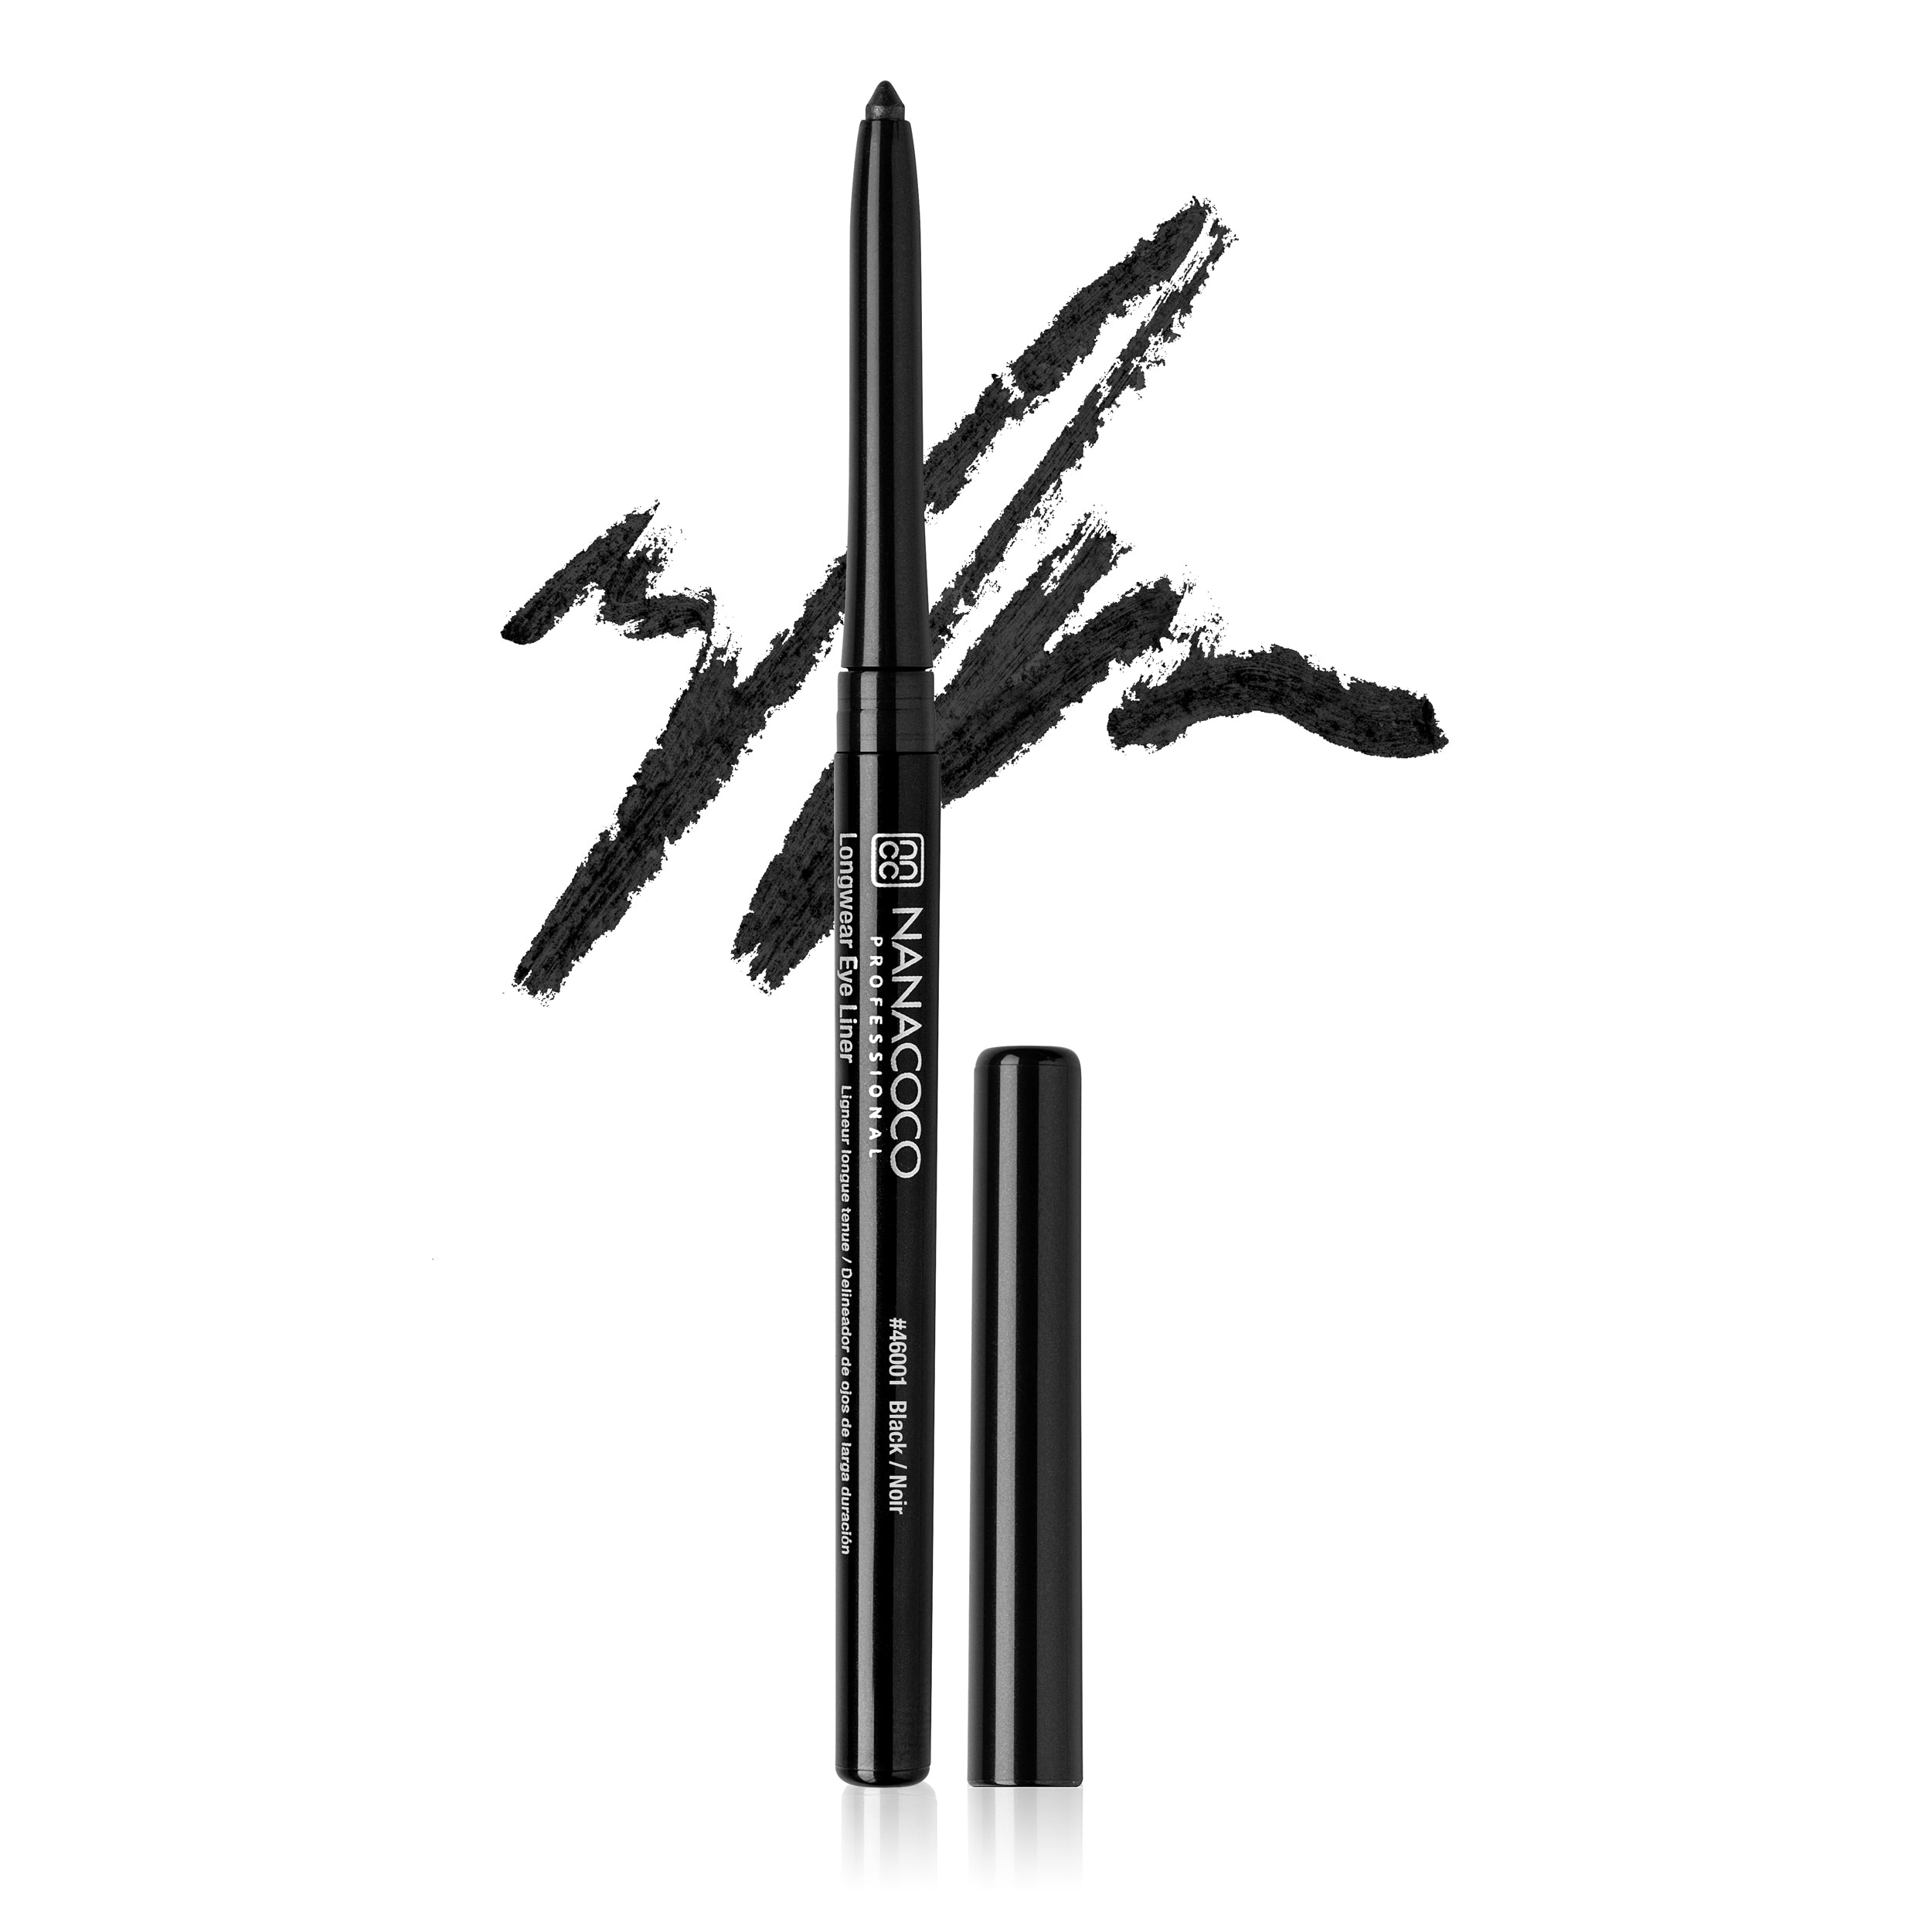 Chanel True Blue (57) Stylo Yeux Waterproof Long-Lasting Eyeliner Review &  Swatches